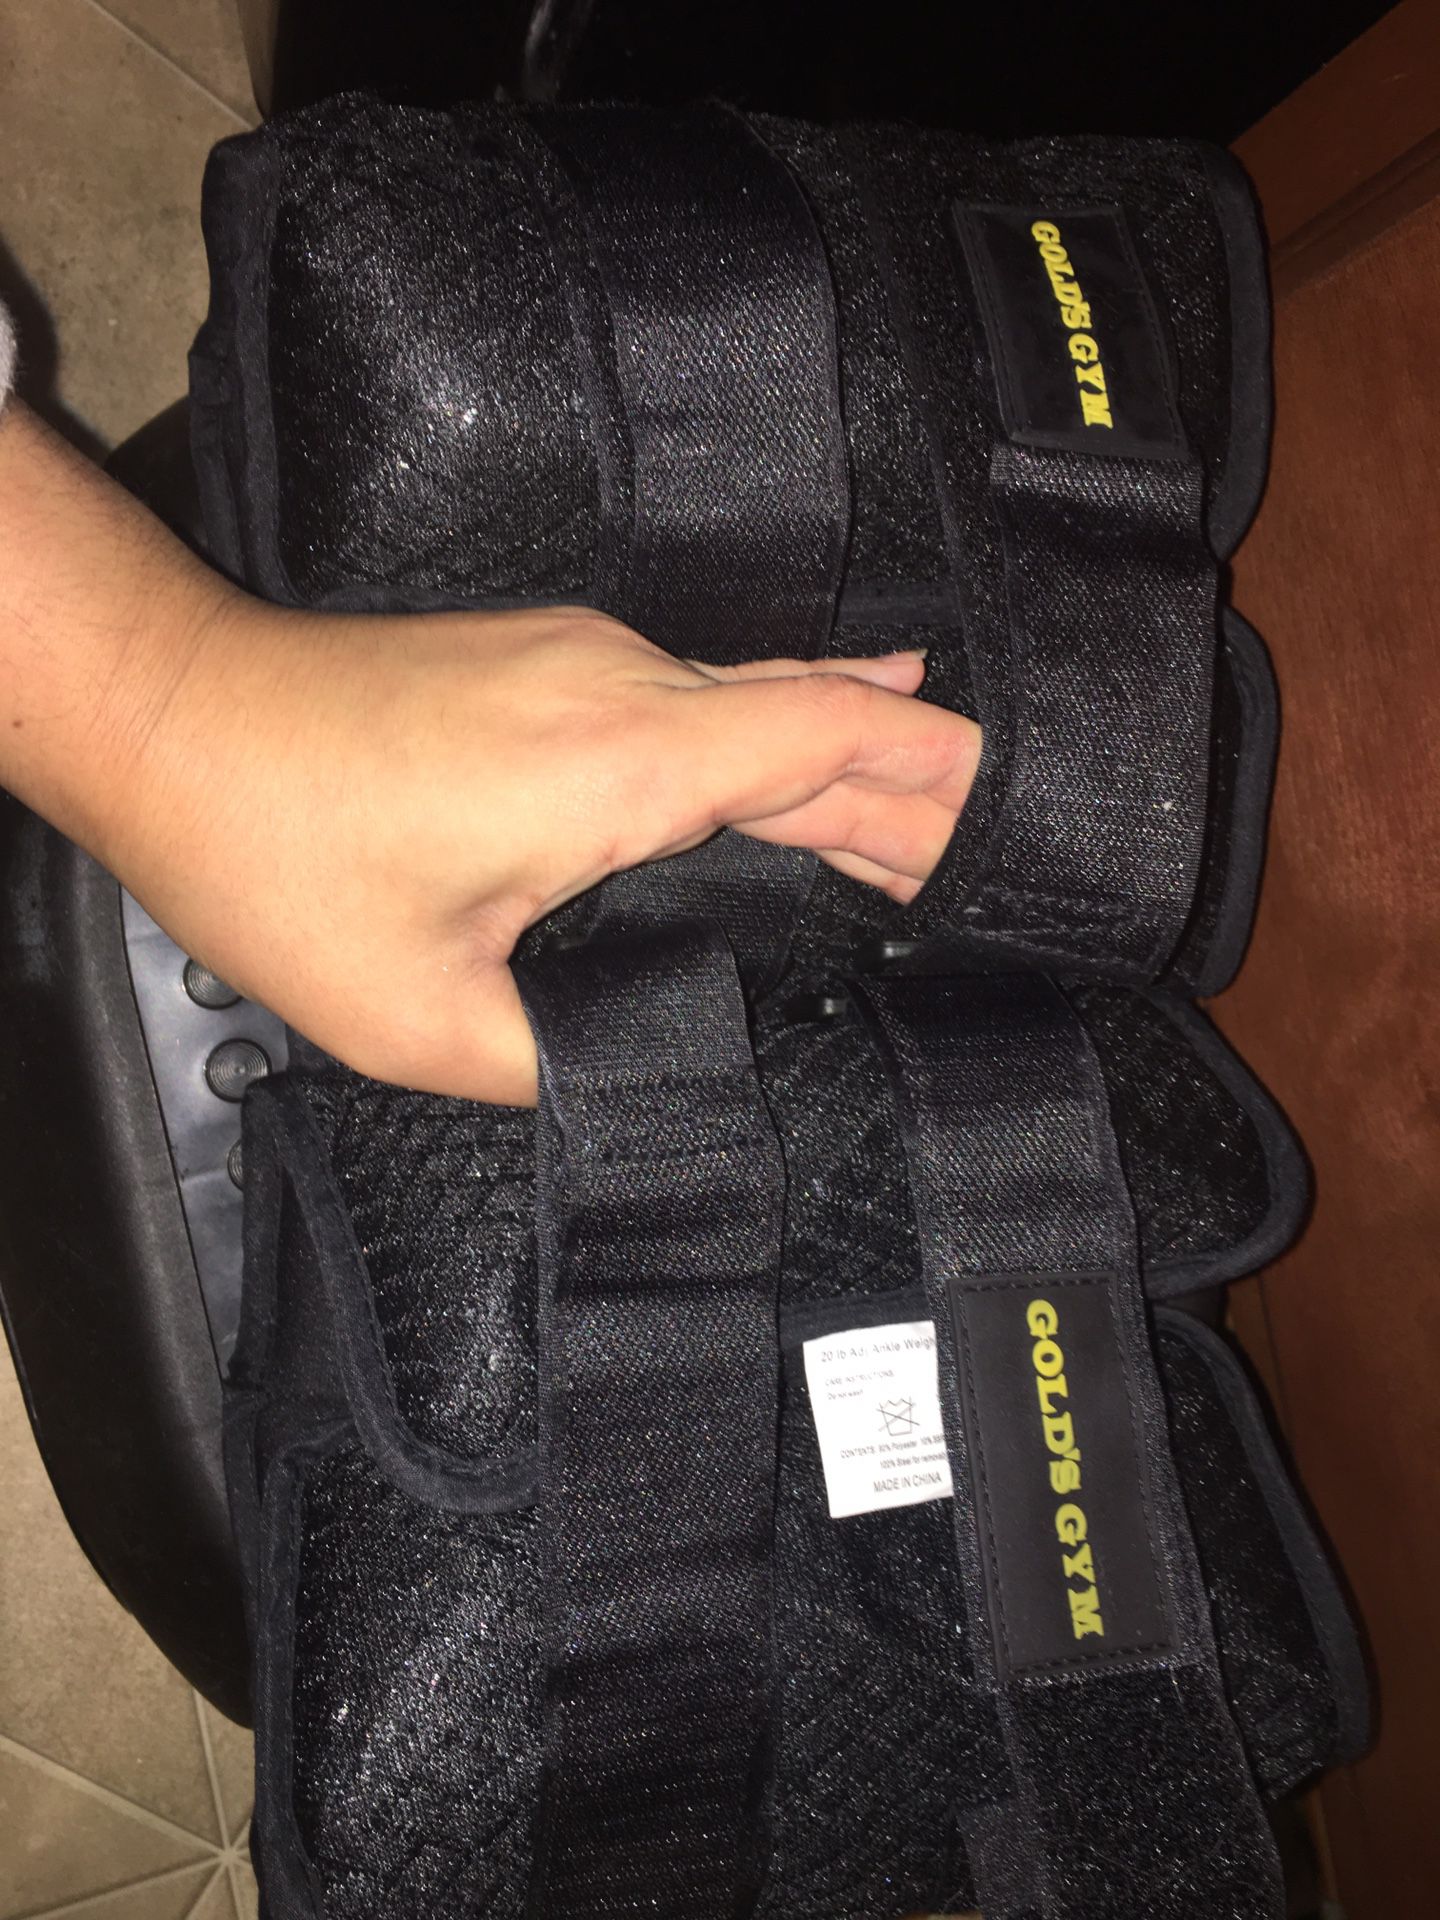 20 lb ankle weights